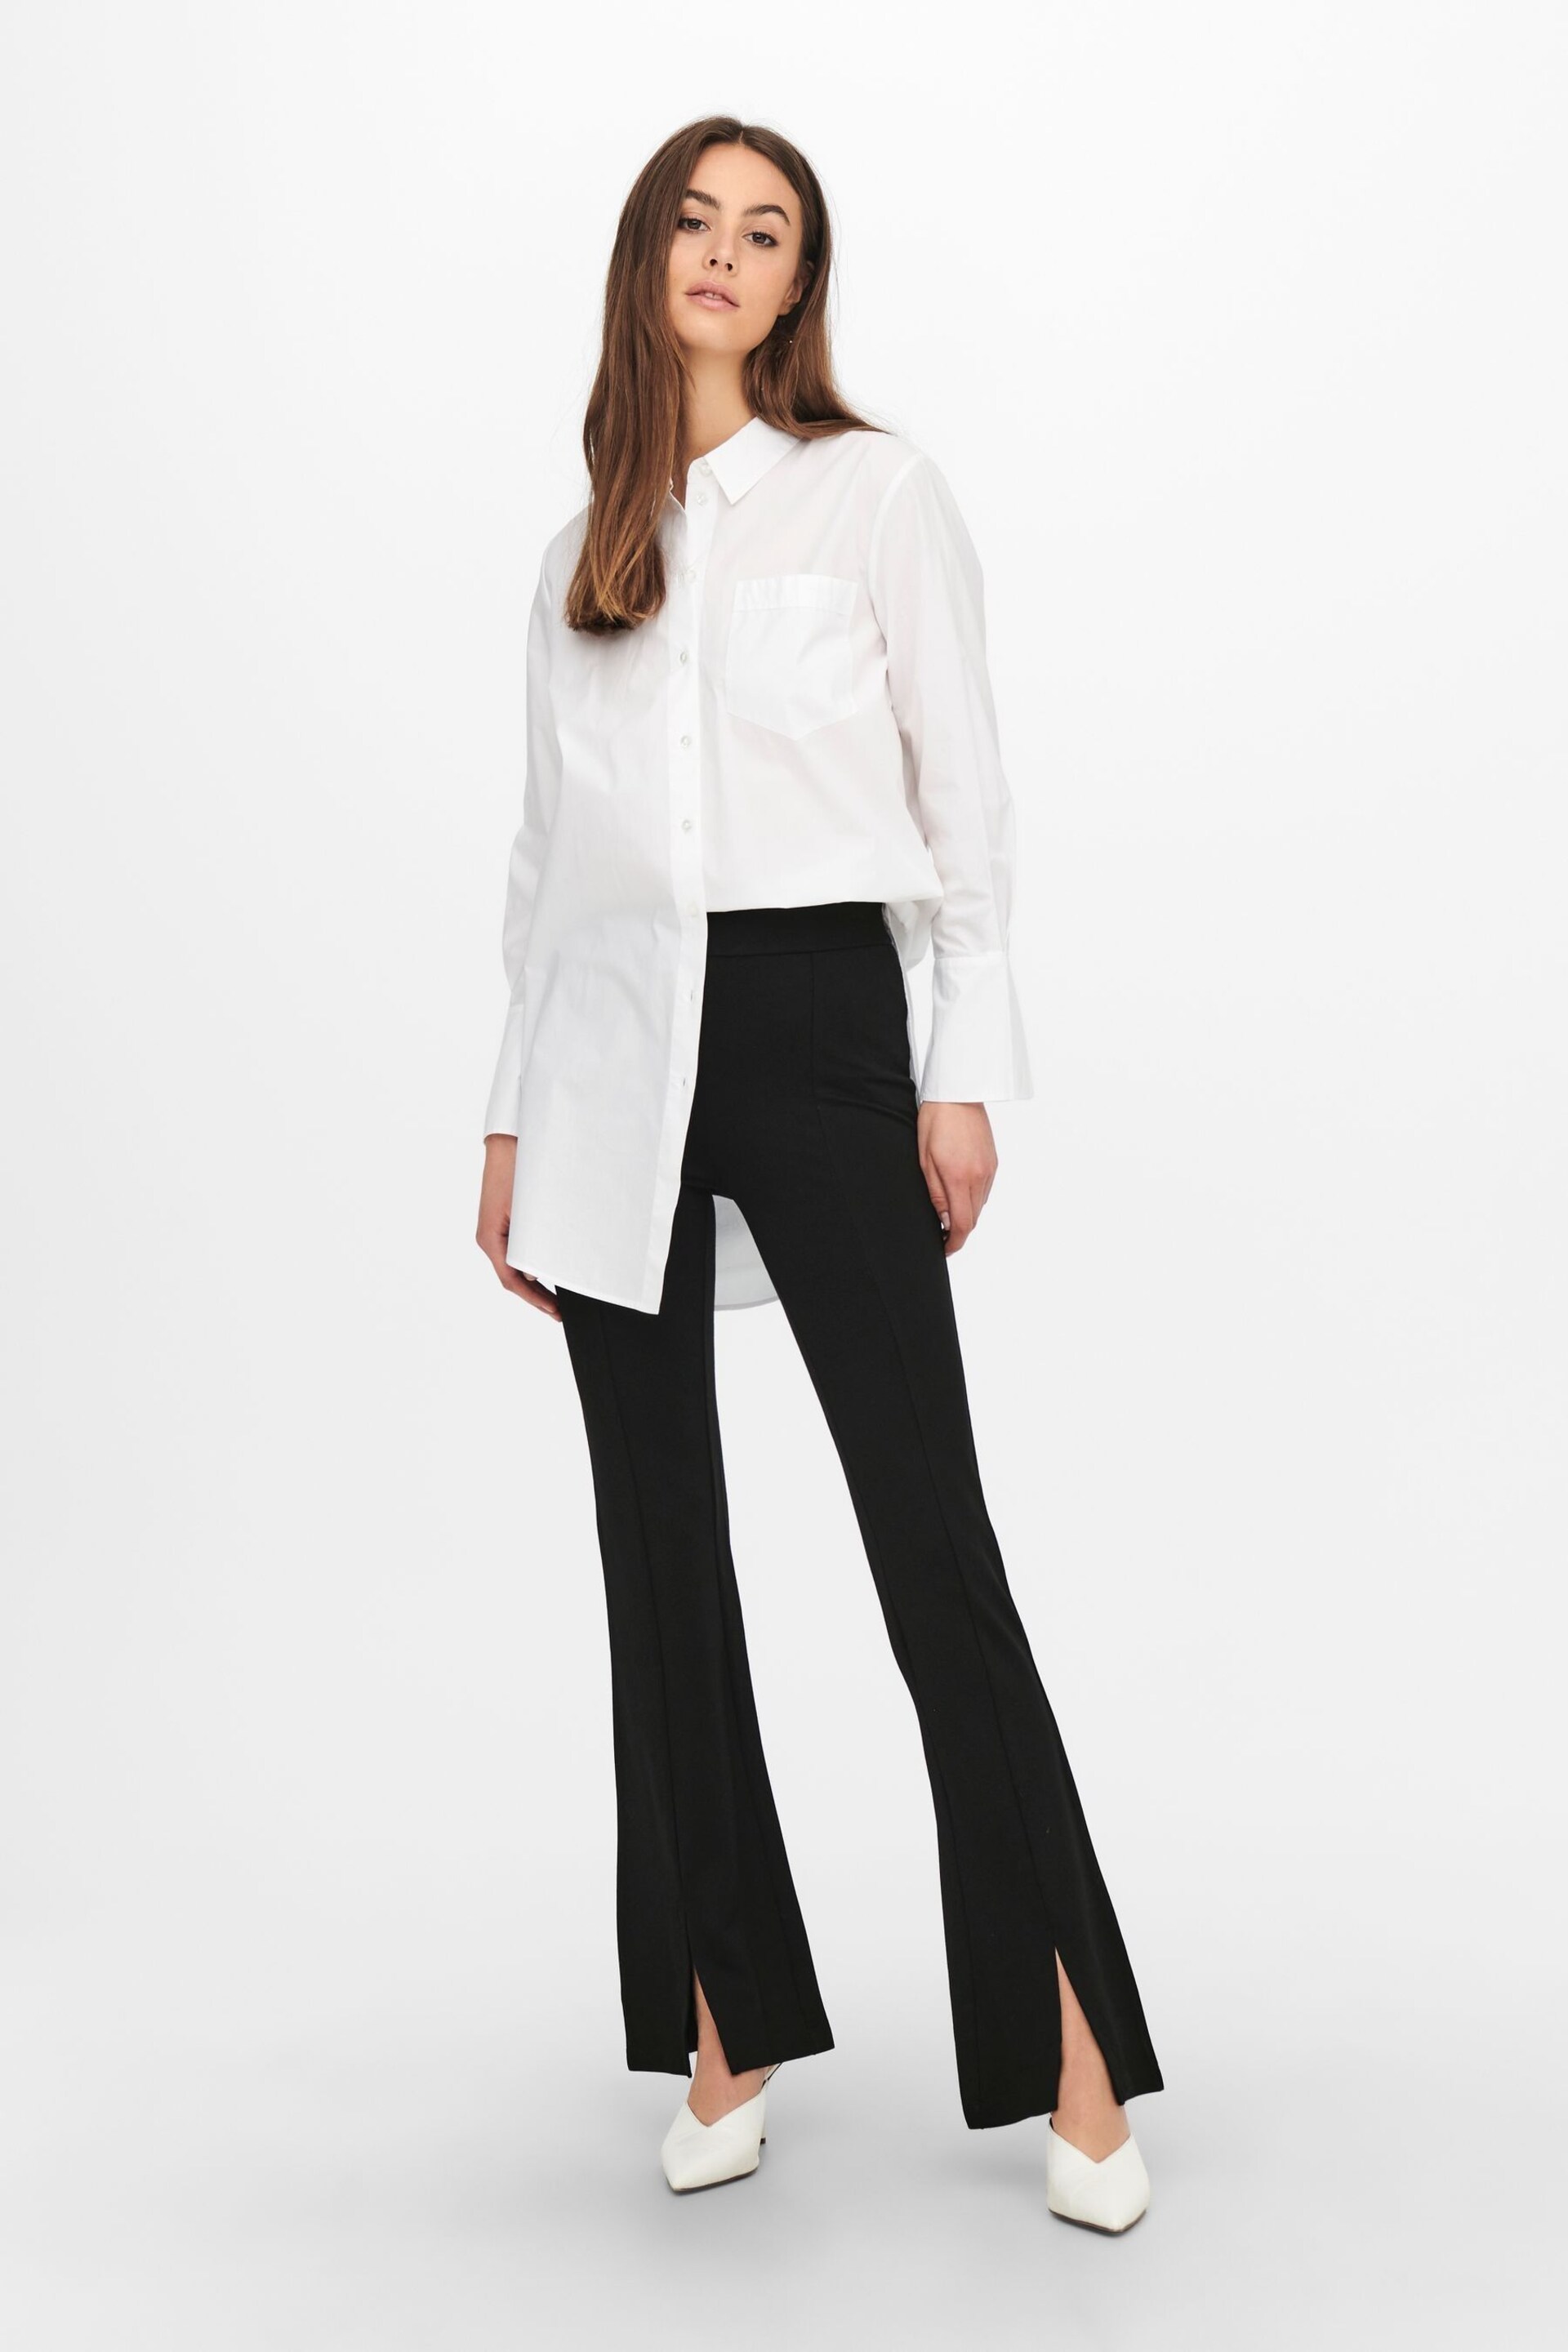 JDY Black High Waisted Flare Trousers with Front Split - Image 5 of 7